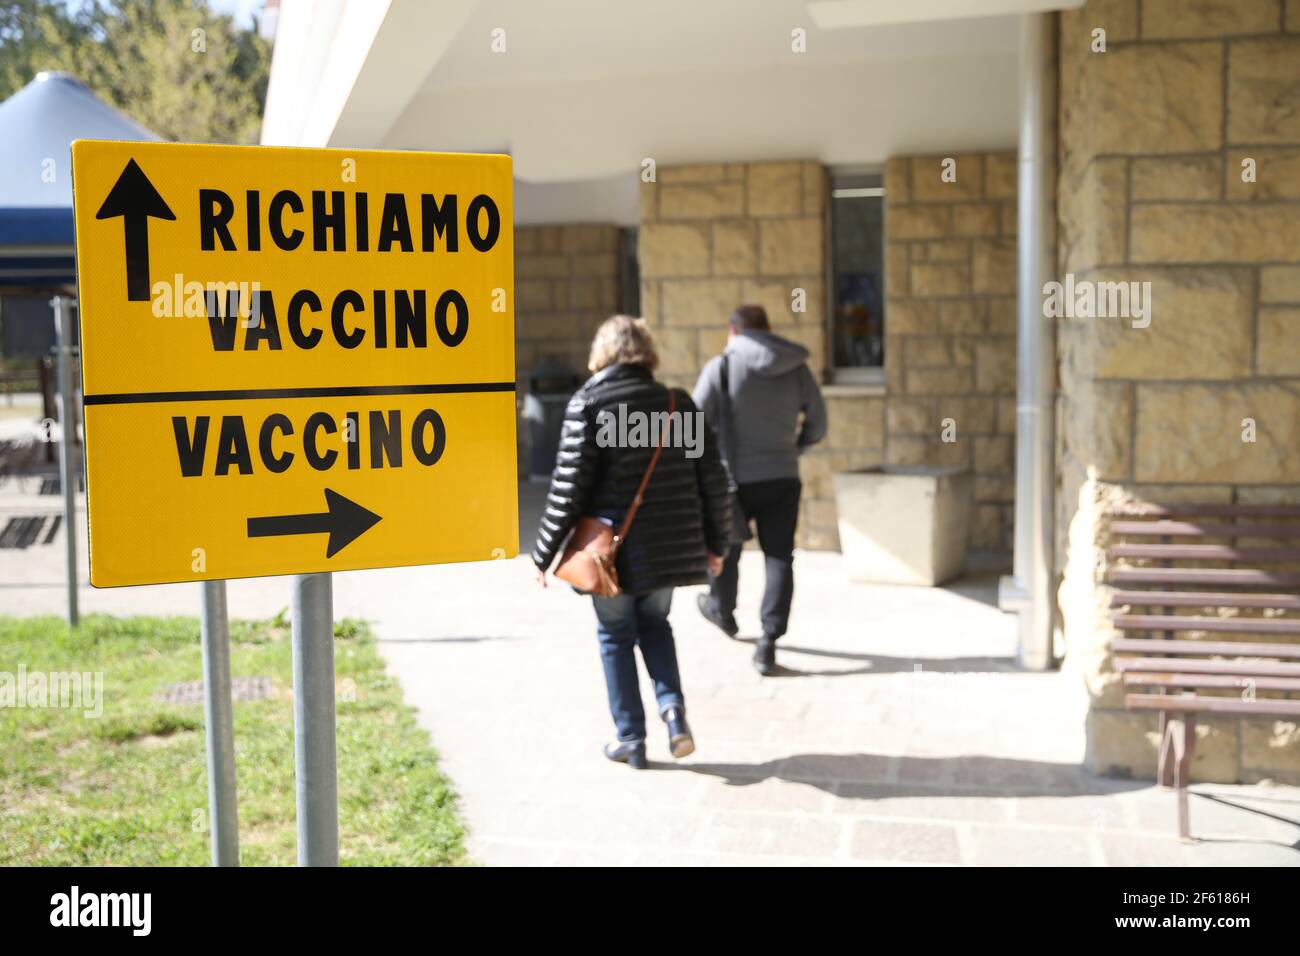 San Marino, Italy, 29/03/21, Residents of San Marino arriving to receive their Sputnik V vaccine today at the San Marino state hospital, after Russia stepped in after Italian deliveries failed to arrive. Moscow sent 7,500 doses of its Sputnik V jab to the enclave to help out. Credit: Jonathan Moscrop/Sportimage/Alamy Live News Stock Photo